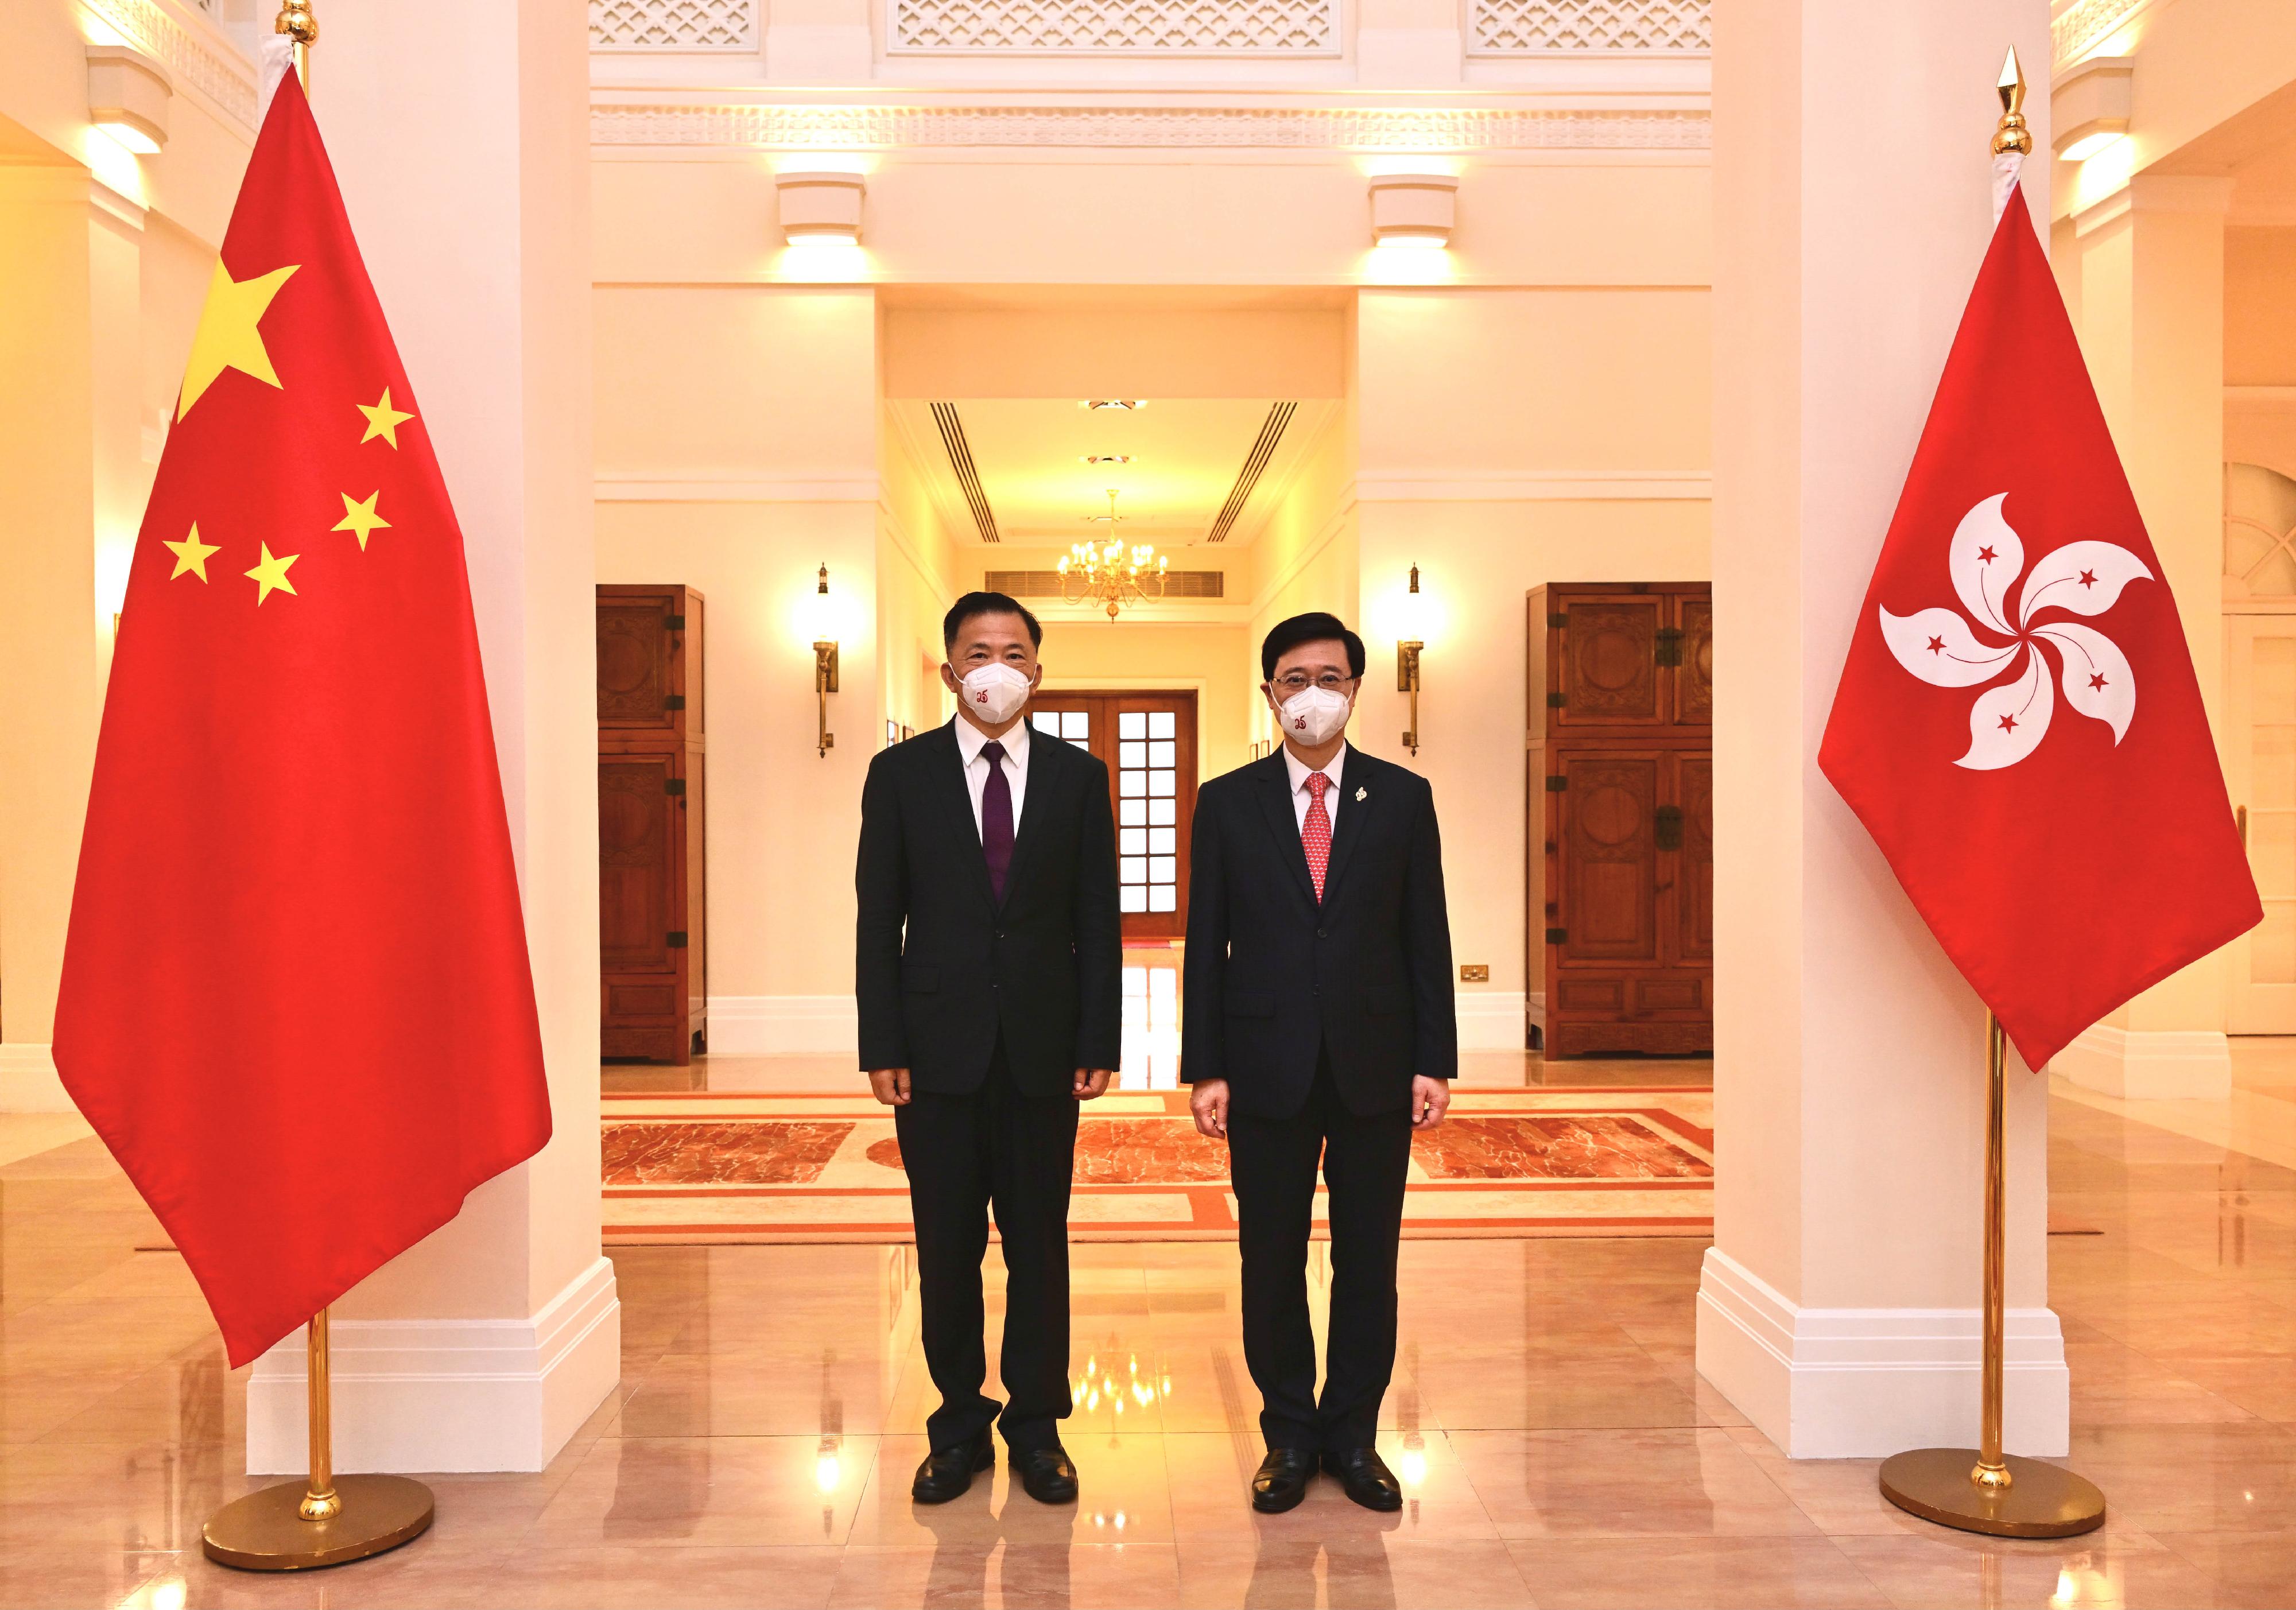 The Chief Executive, Mr John Lee, met with the Vice Minister of the Publicity Department of the Communist Party of China Central Committee and President and Editor-in-Chief of China Media Group, Mr Shen Haixiong, at Government House today (July 1). Photo shows Mr Lee (right) and Mr Shen (left).